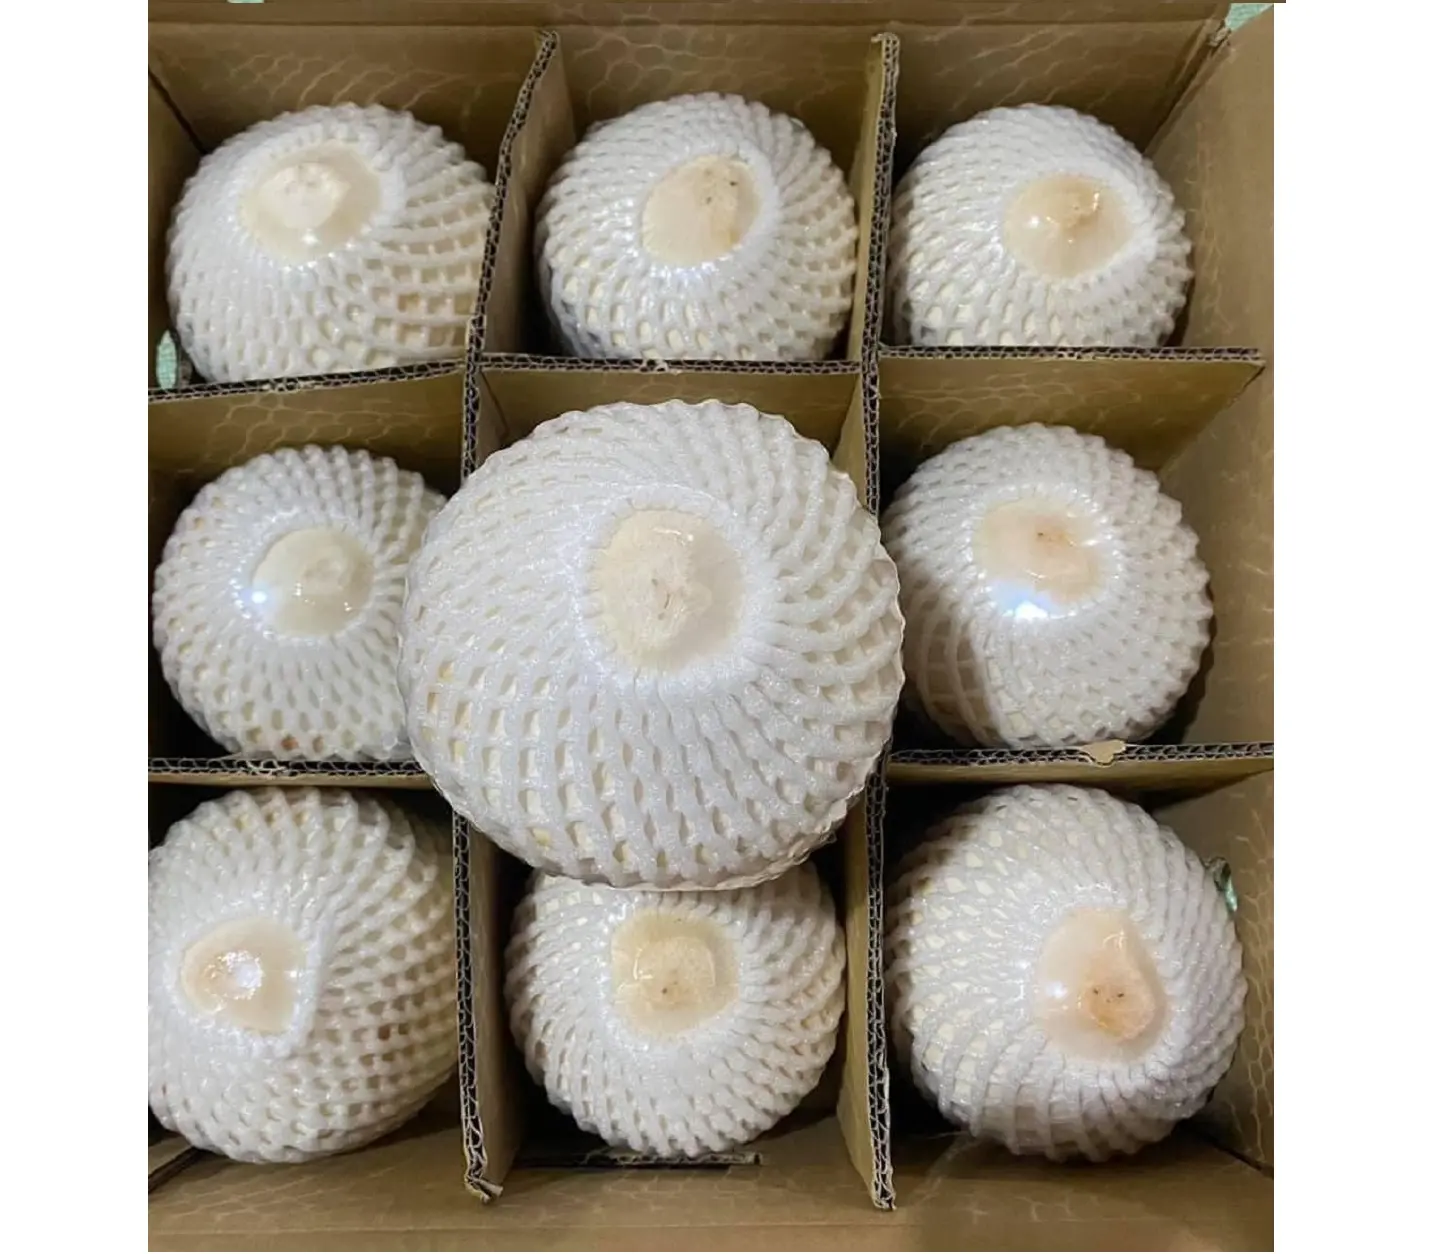 Number One Tropical Fruit/ No Preservations Fresh Coconut Coconut Water From Vietnam Top Supplier